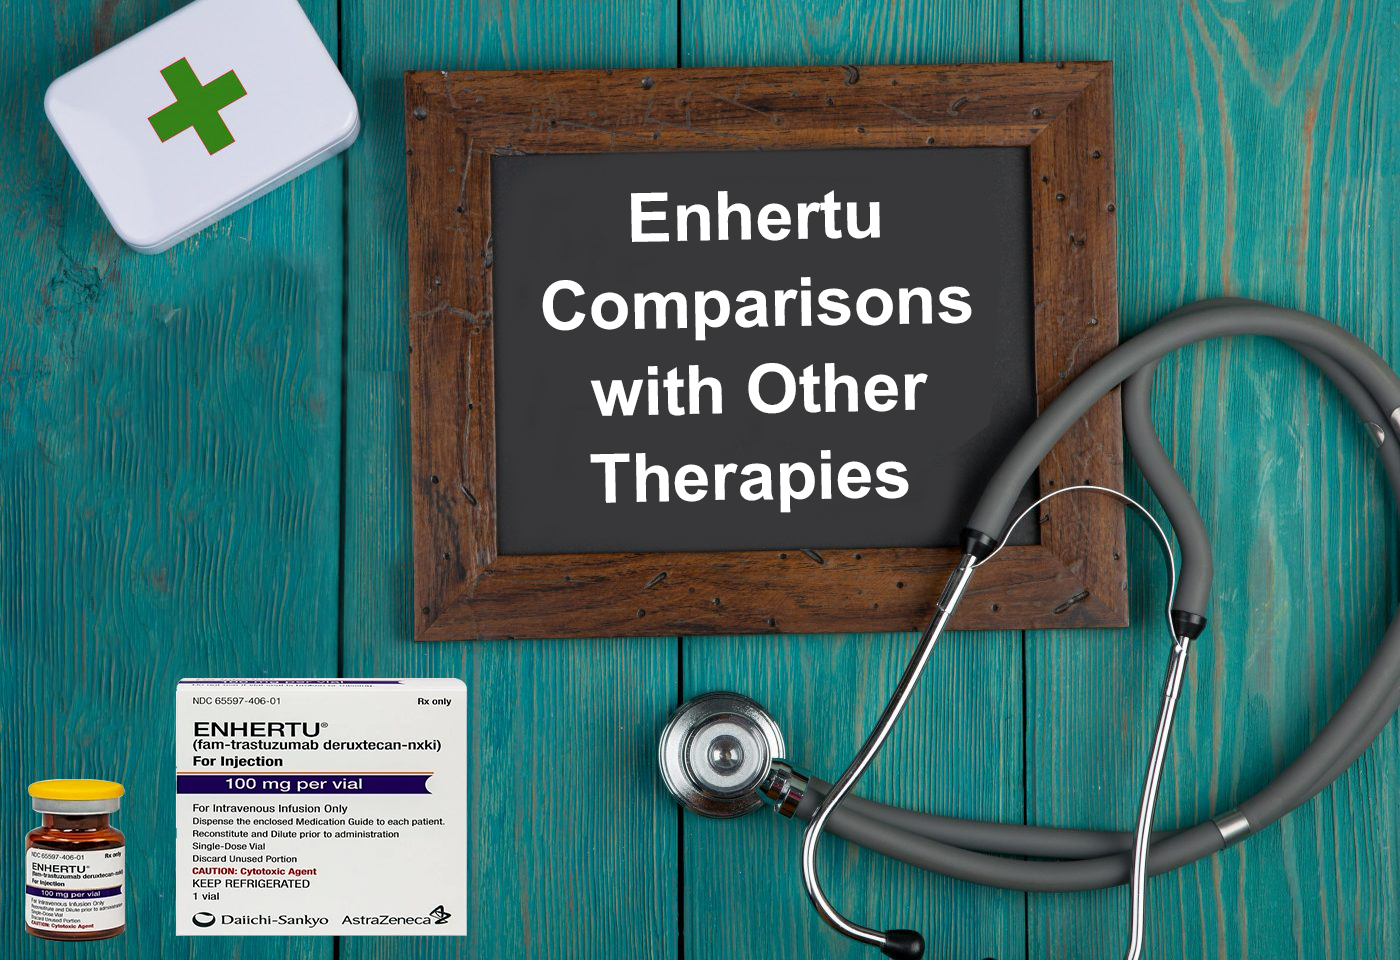 Enhertu Comparisons with Other Therapies